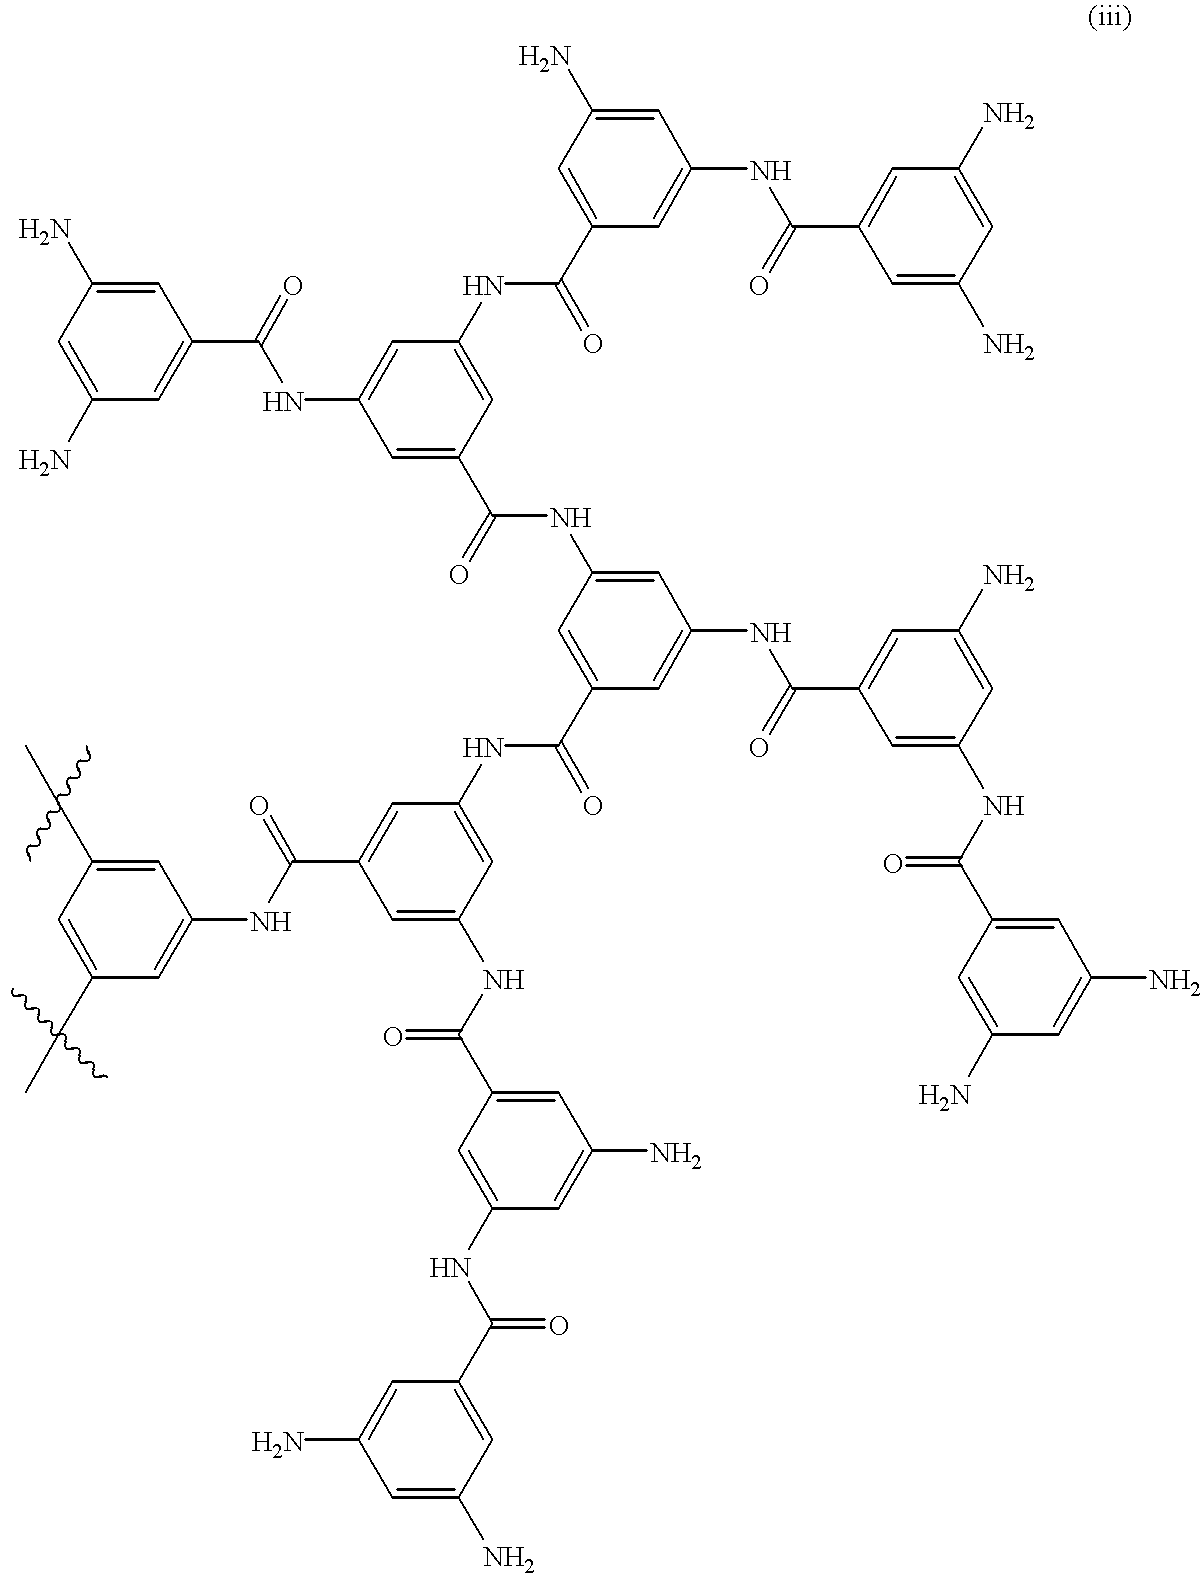 Vinyl-group-containing dendrimer and curable composition